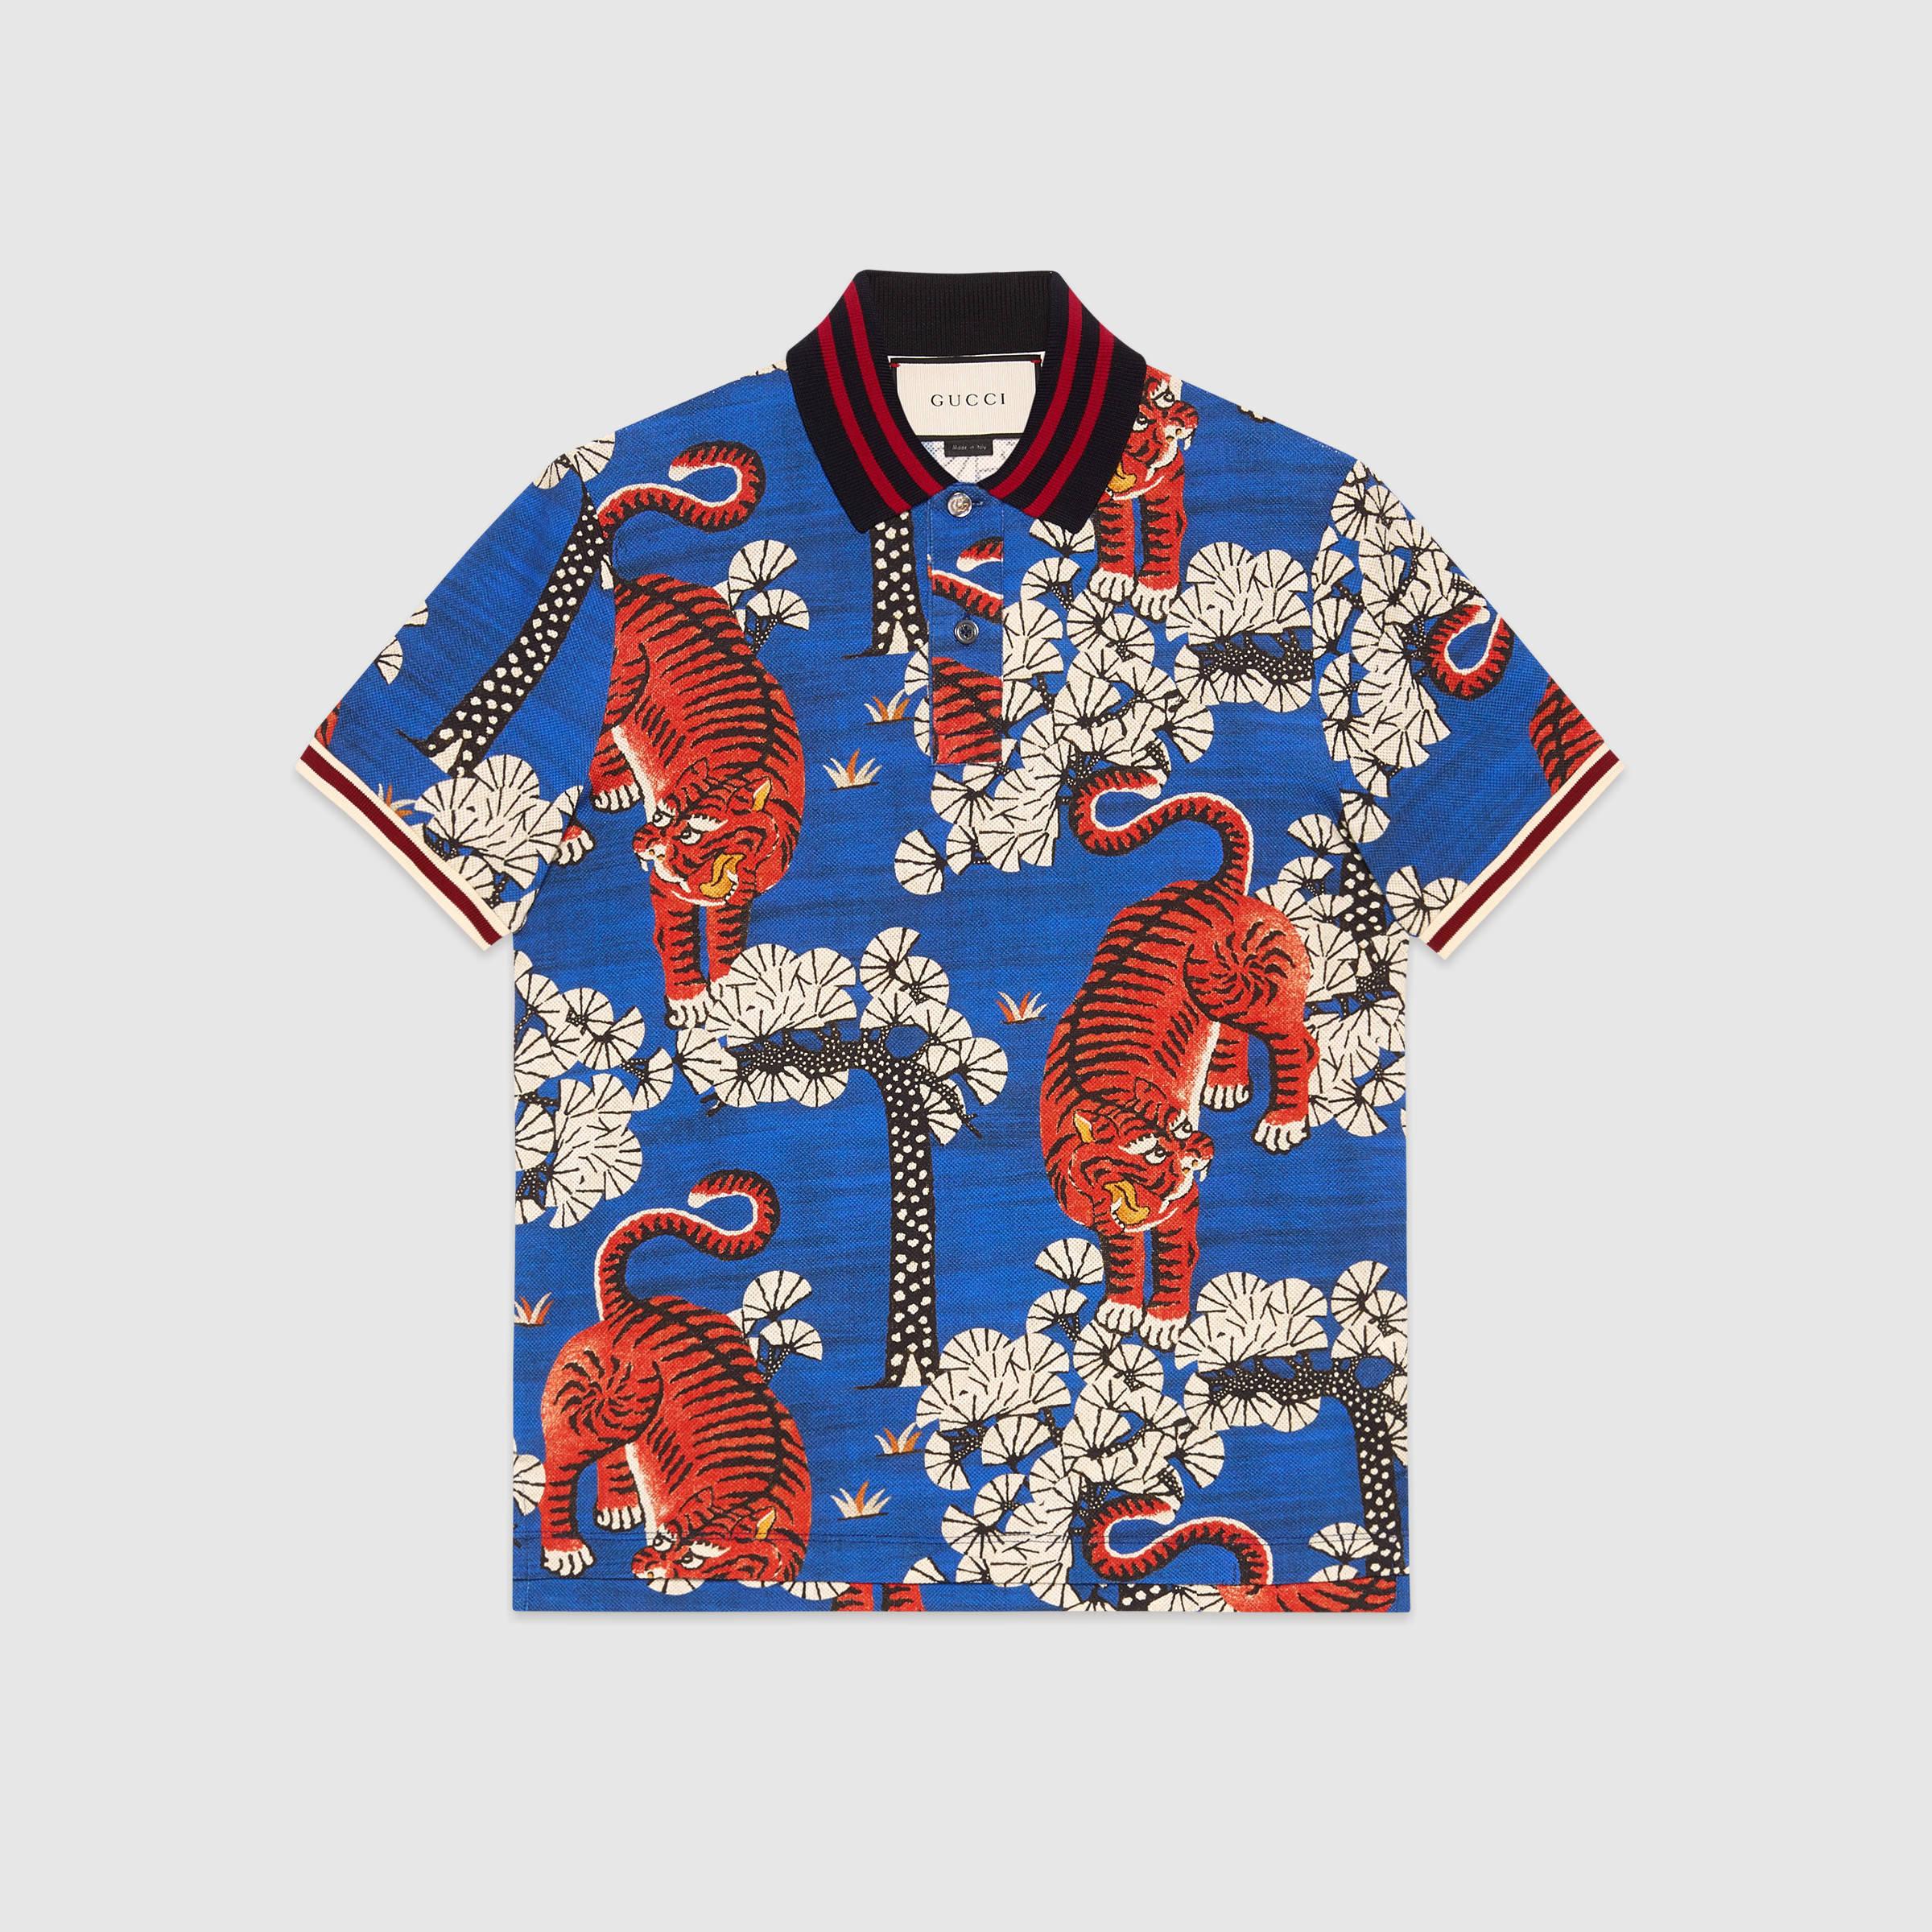 gucci polo with tiger